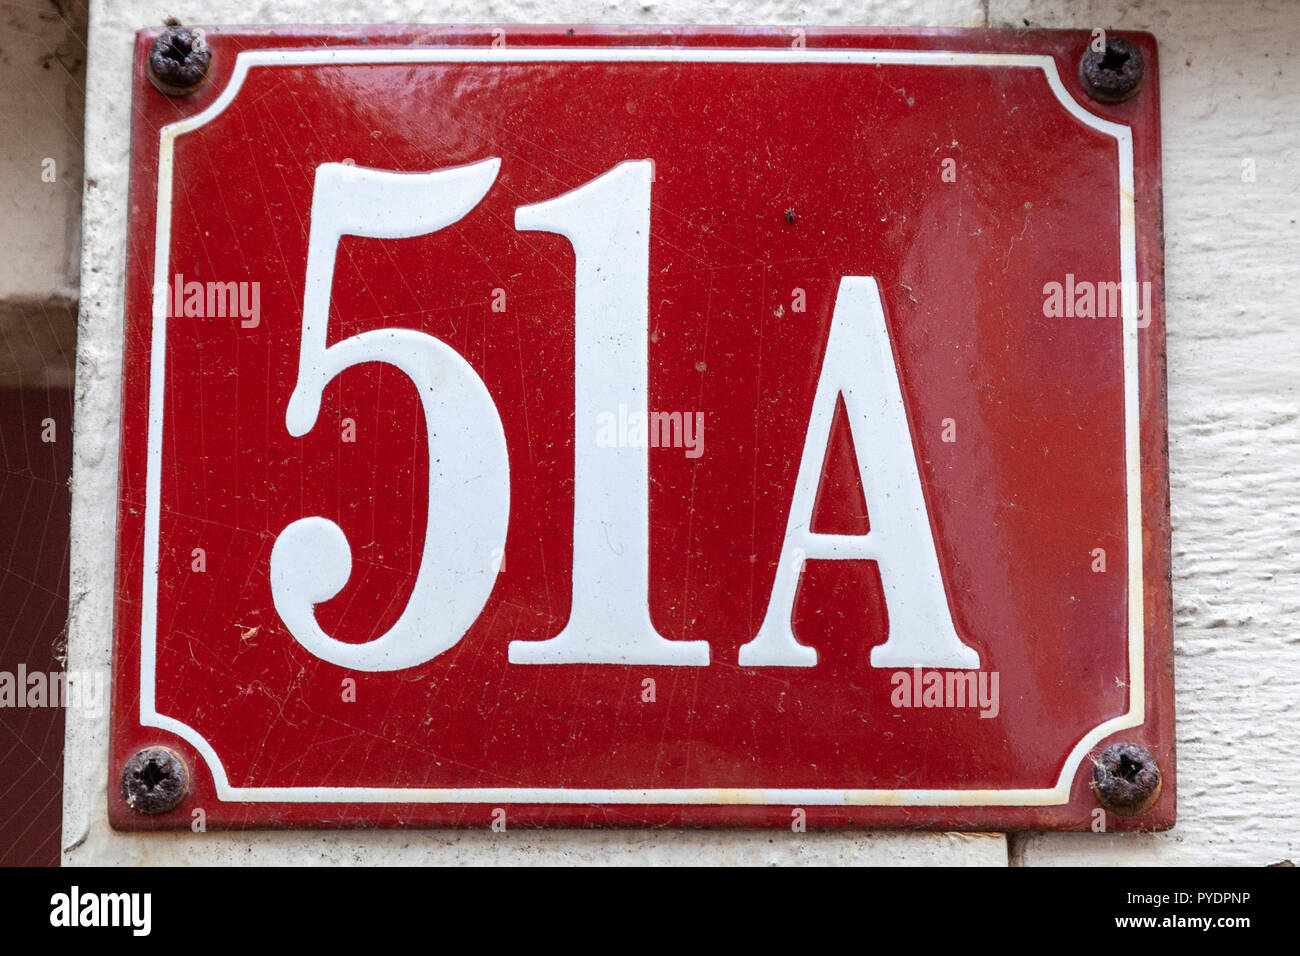 House number fifty-one A 51A on enamel plaque in white on red background from Sweden Stock Photo